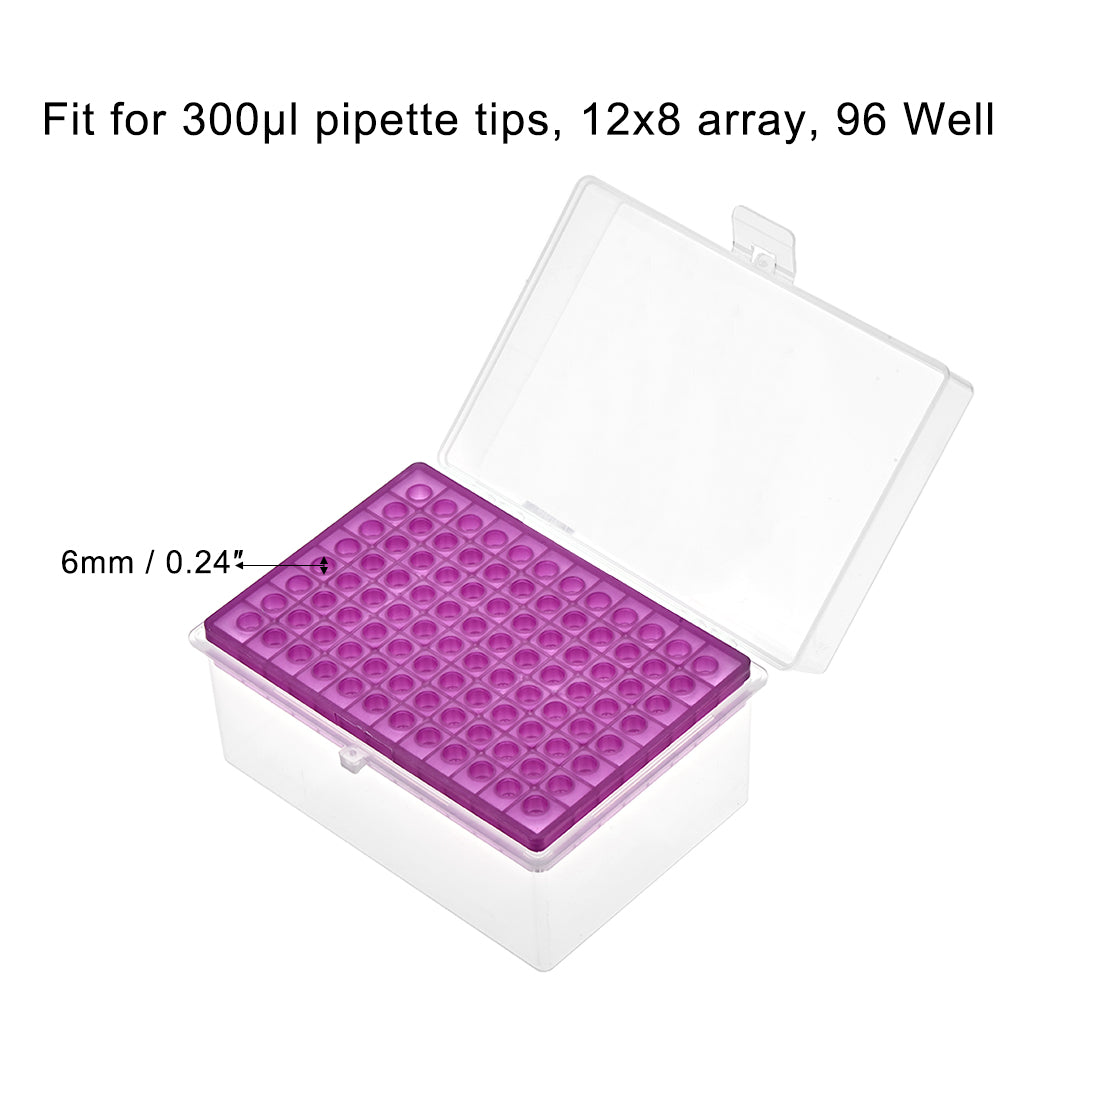 uxcell Uxcell Pipette Tips Box 96-Well Polypropylene Tip Holder Container for 300ul Pipettor 6mm Hole Diameter